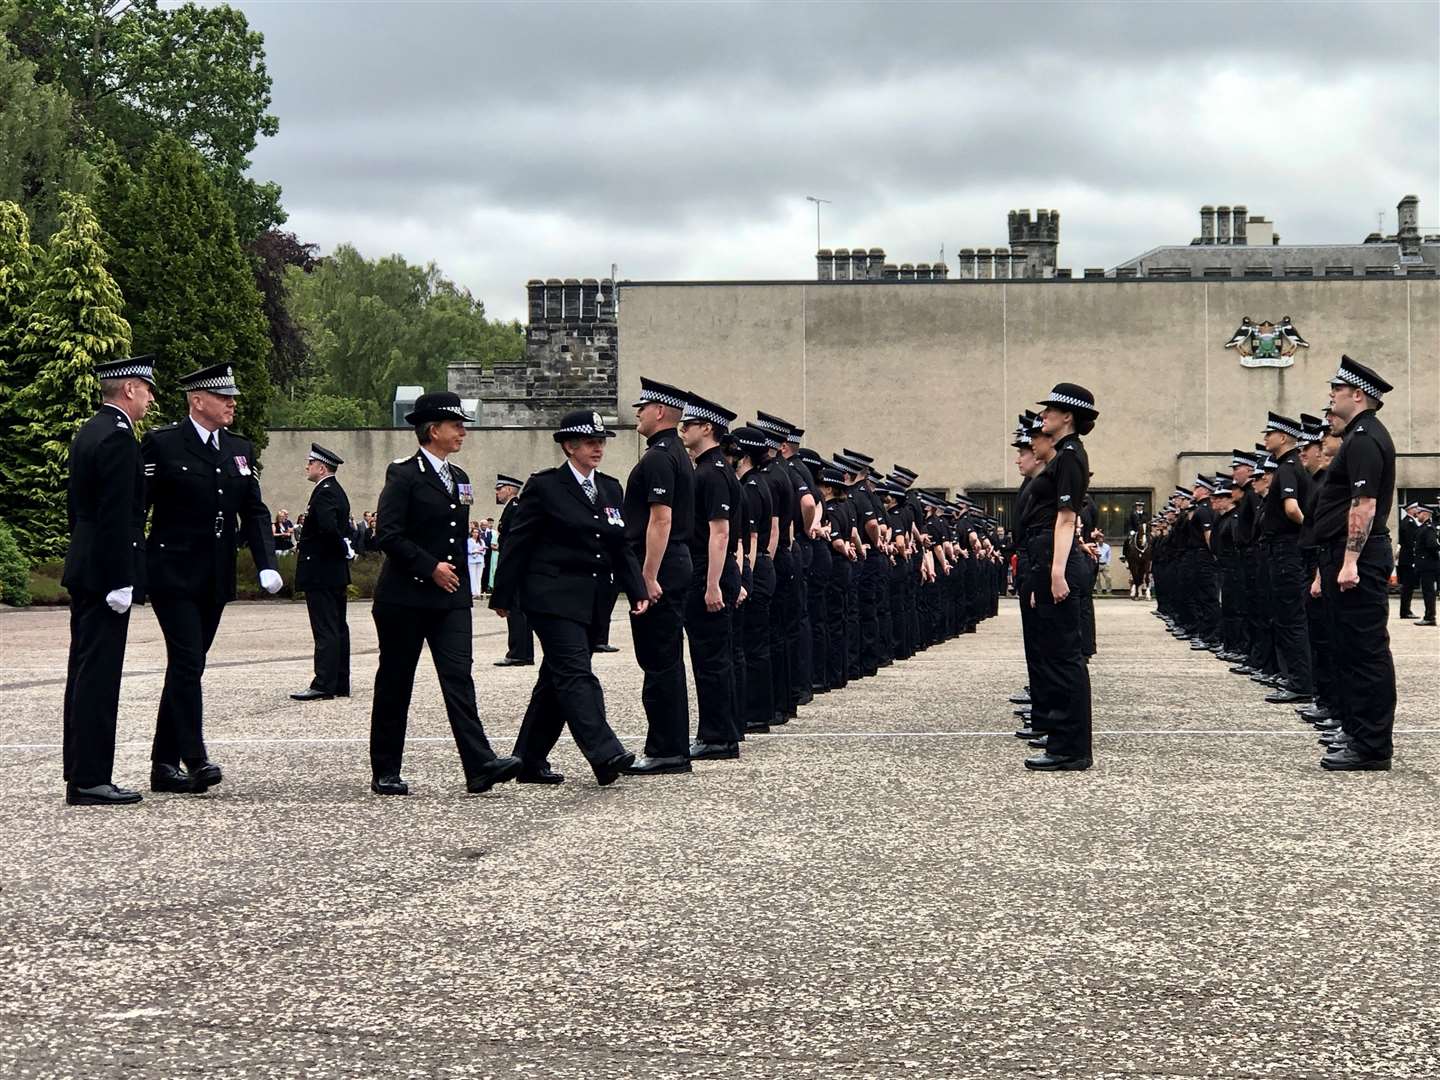 34 new officers will head to the north-east